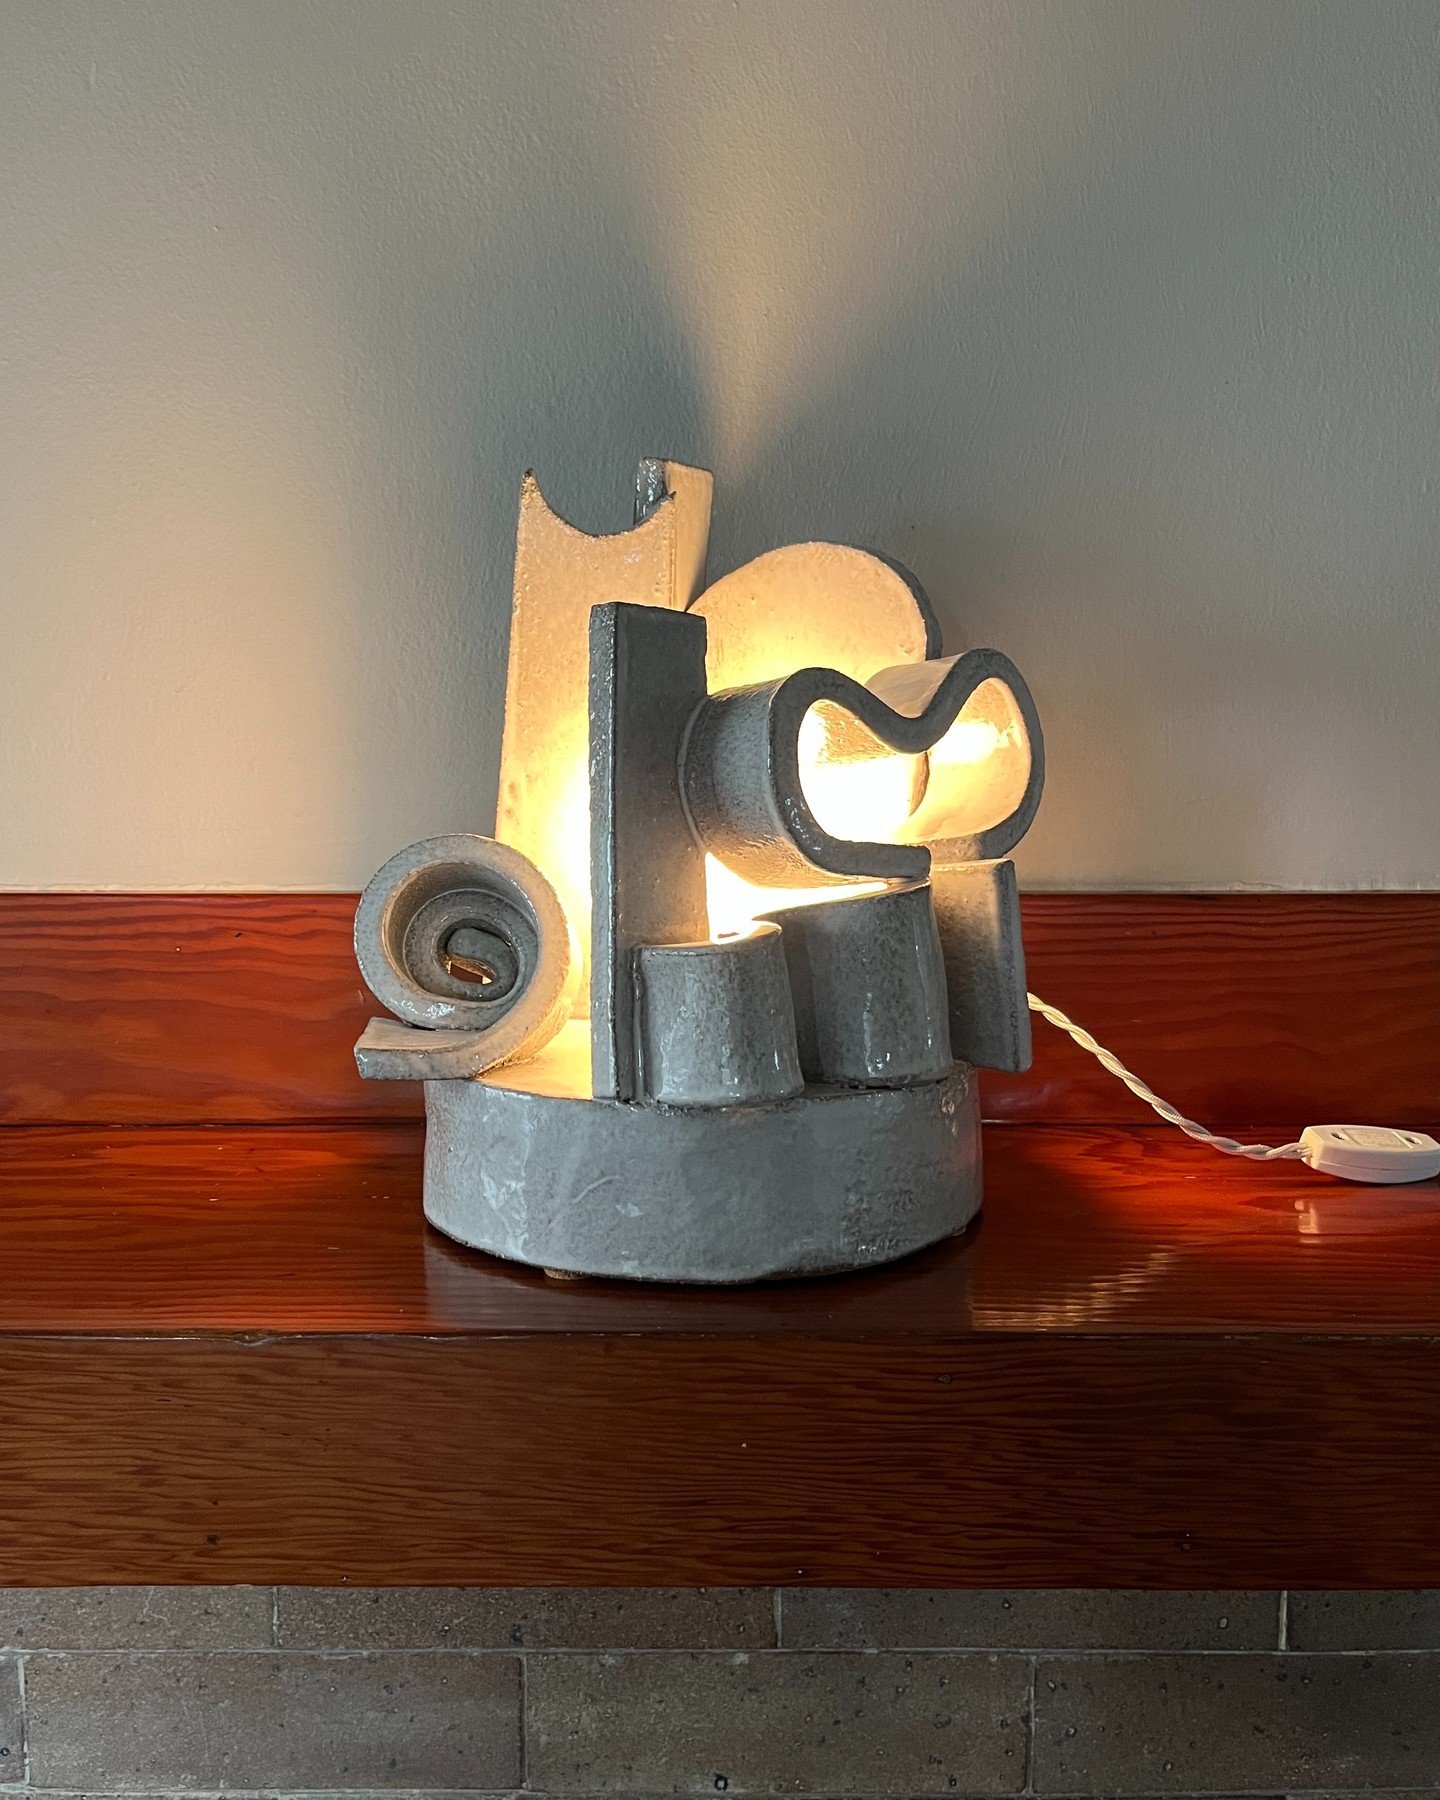 A Sculpture and a Lamp.

10 x 10 x 11 inches

#morganpeckceramics #morganpecklamp #ceramiclamps #ceramiclighting #claylamps